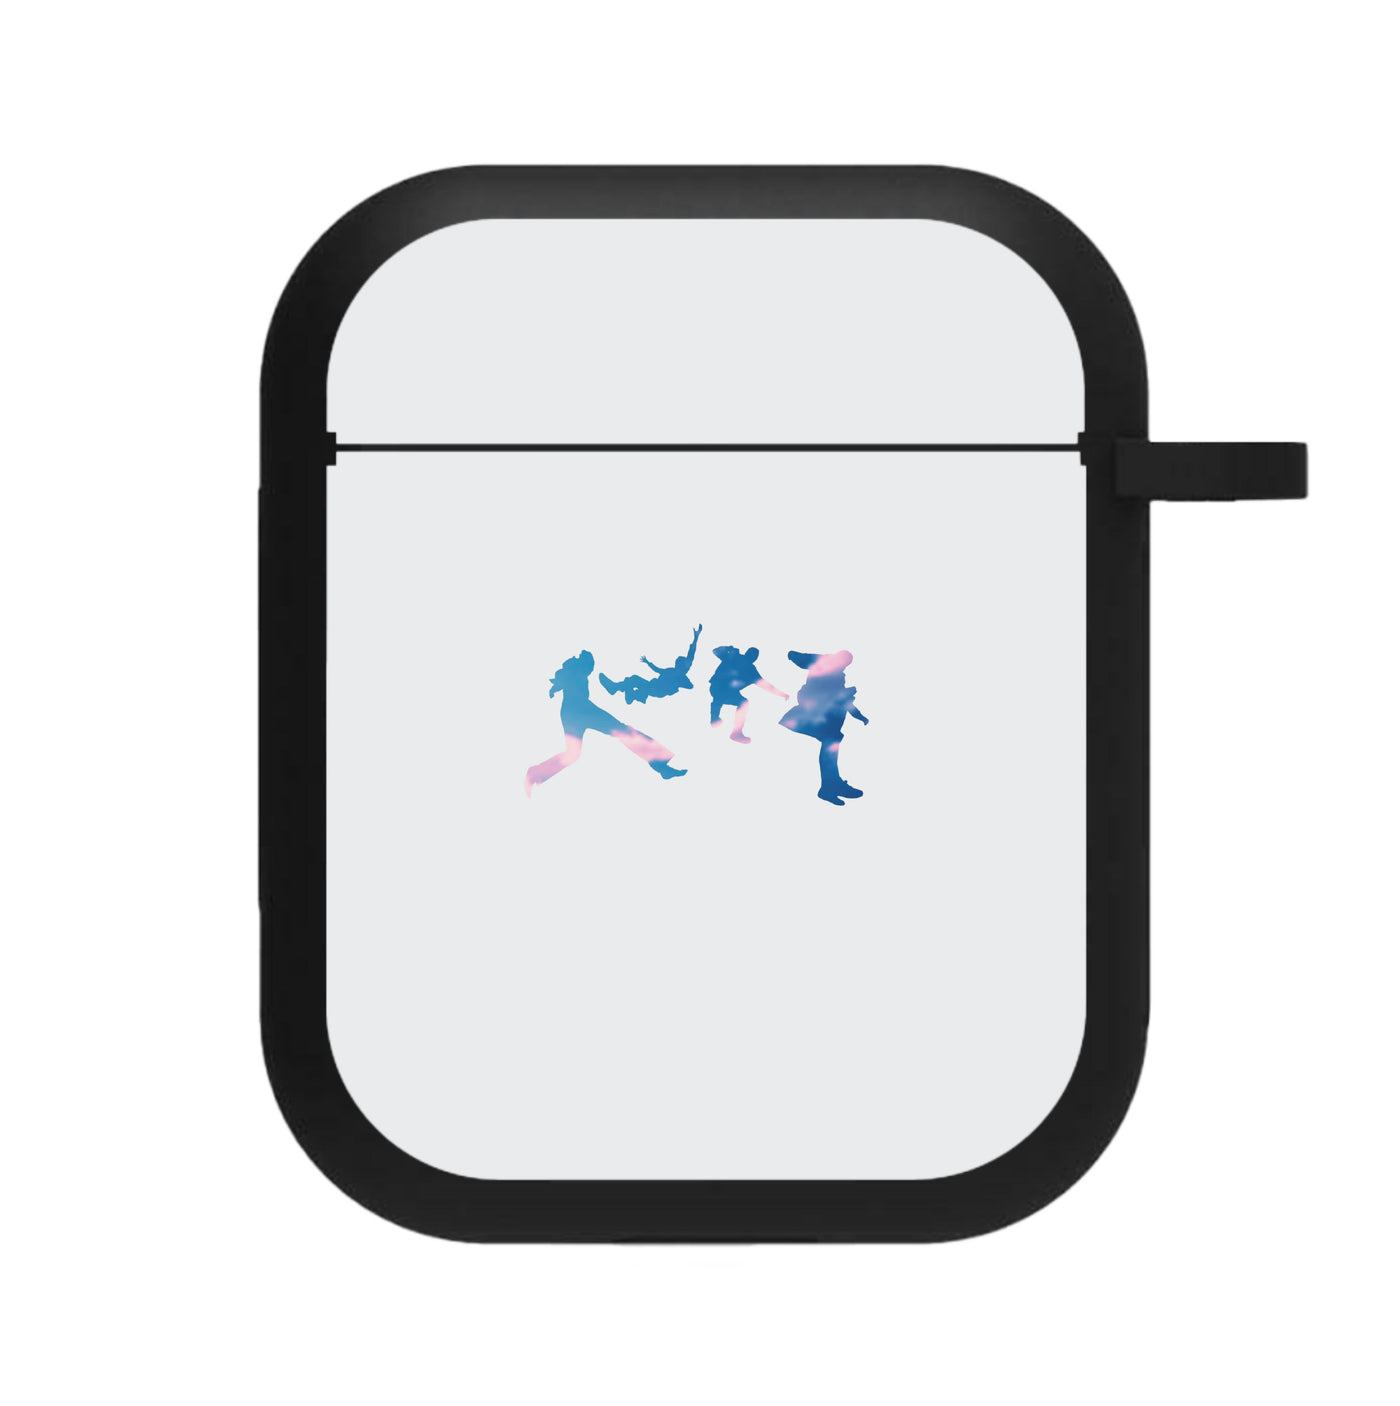 Galaxy - 5 Seconds Of Summer AirPods Case